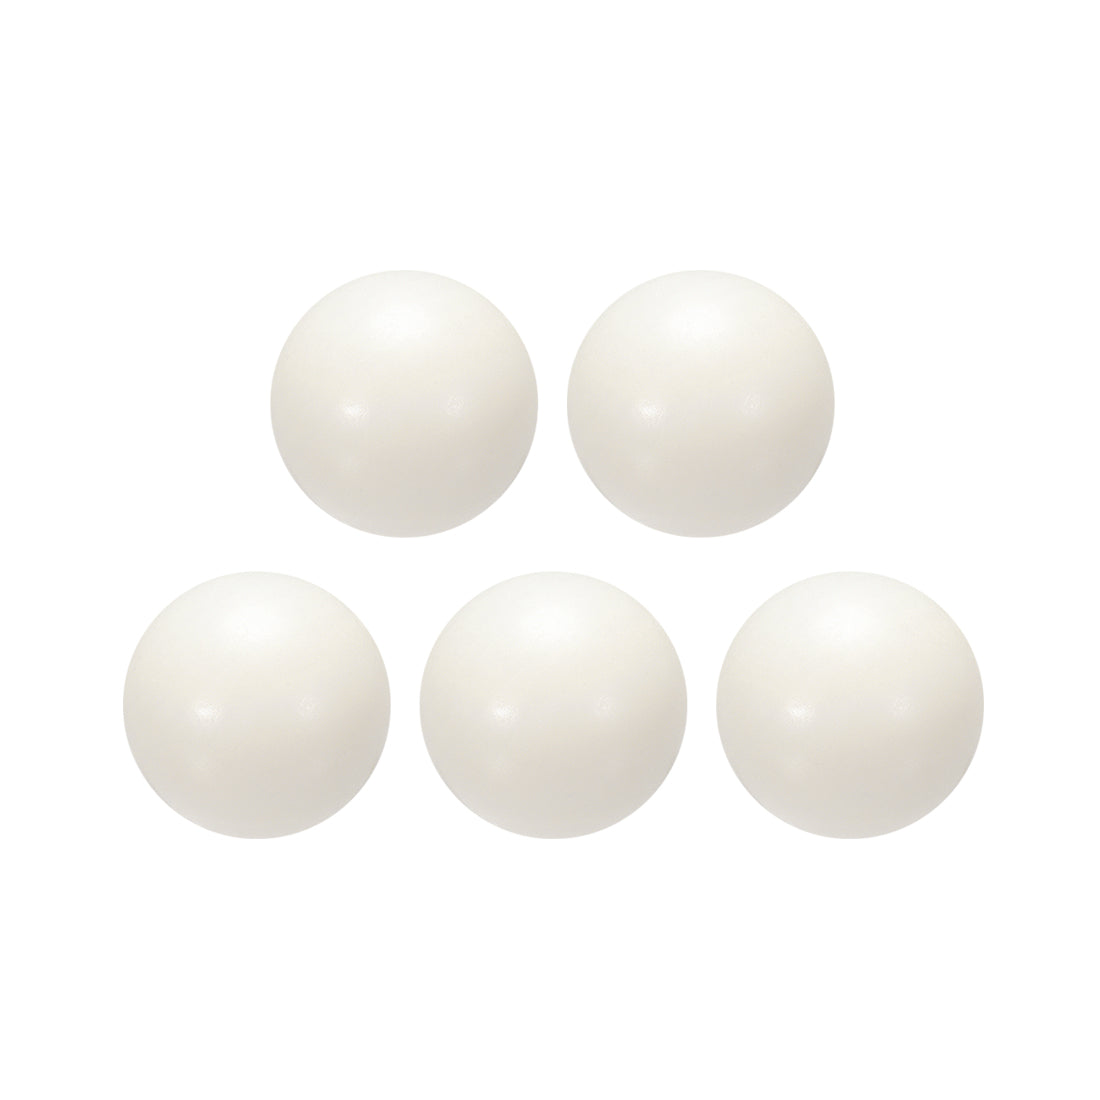 Uxcell Uxcell 3/4-inch PA Nylon Solid Plastic Balls, Precision Bearing Ball 5pcs